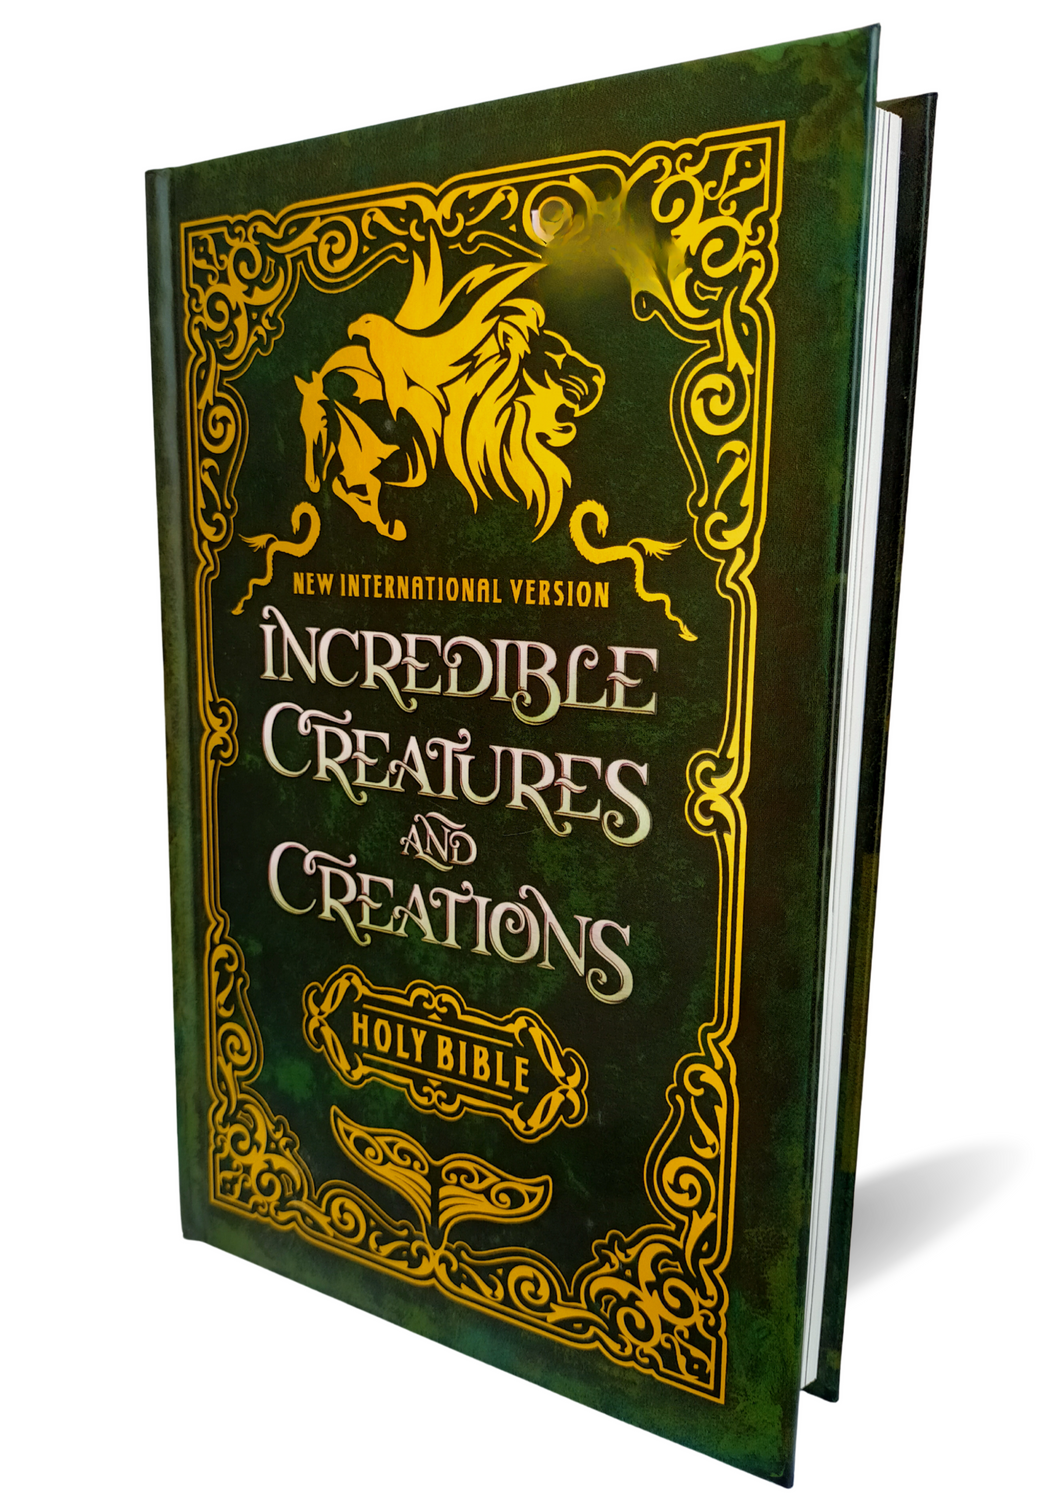 Holy Bible: New International Version, Incredible Creatures and Creations Hardcover – Import